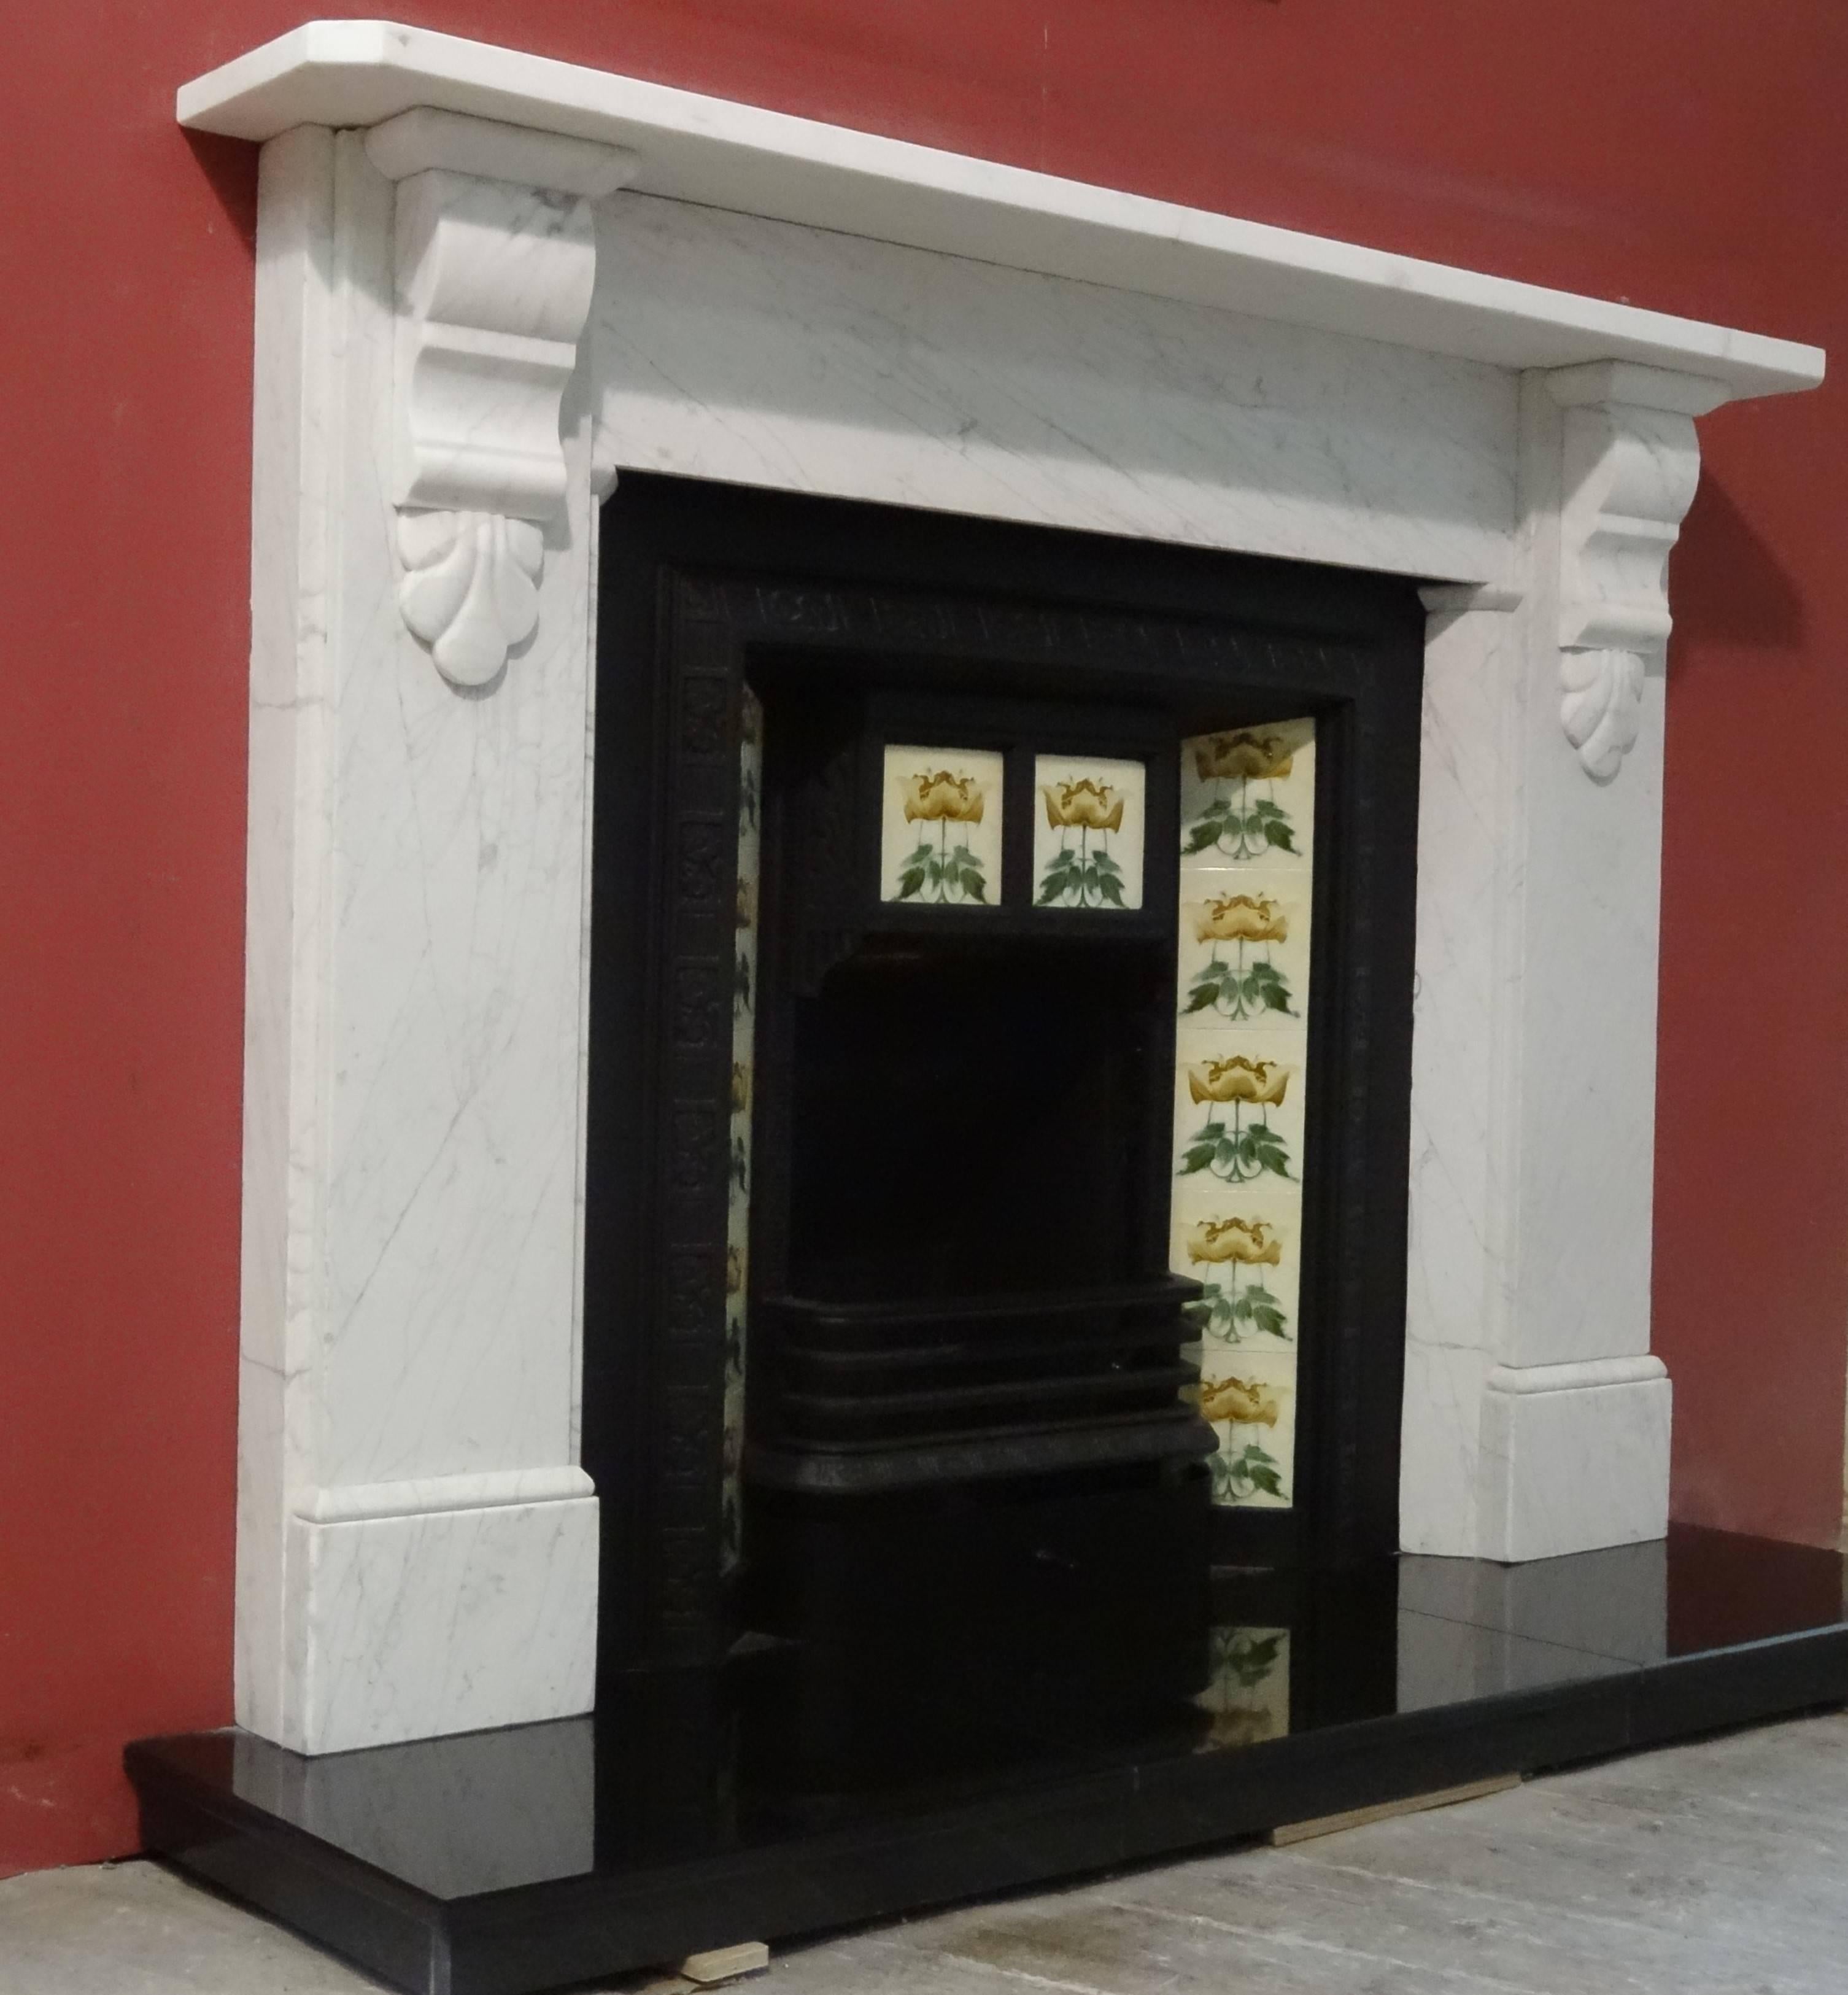 19th century Victorian white Carrara marble chimney piece. Reclaimed from a Victorian property in County Tyrone Northern Ireland. Cast iron tiled Insert, granite hearth shown are sold separately.

Fire surround internal aperture:
Measure: Width